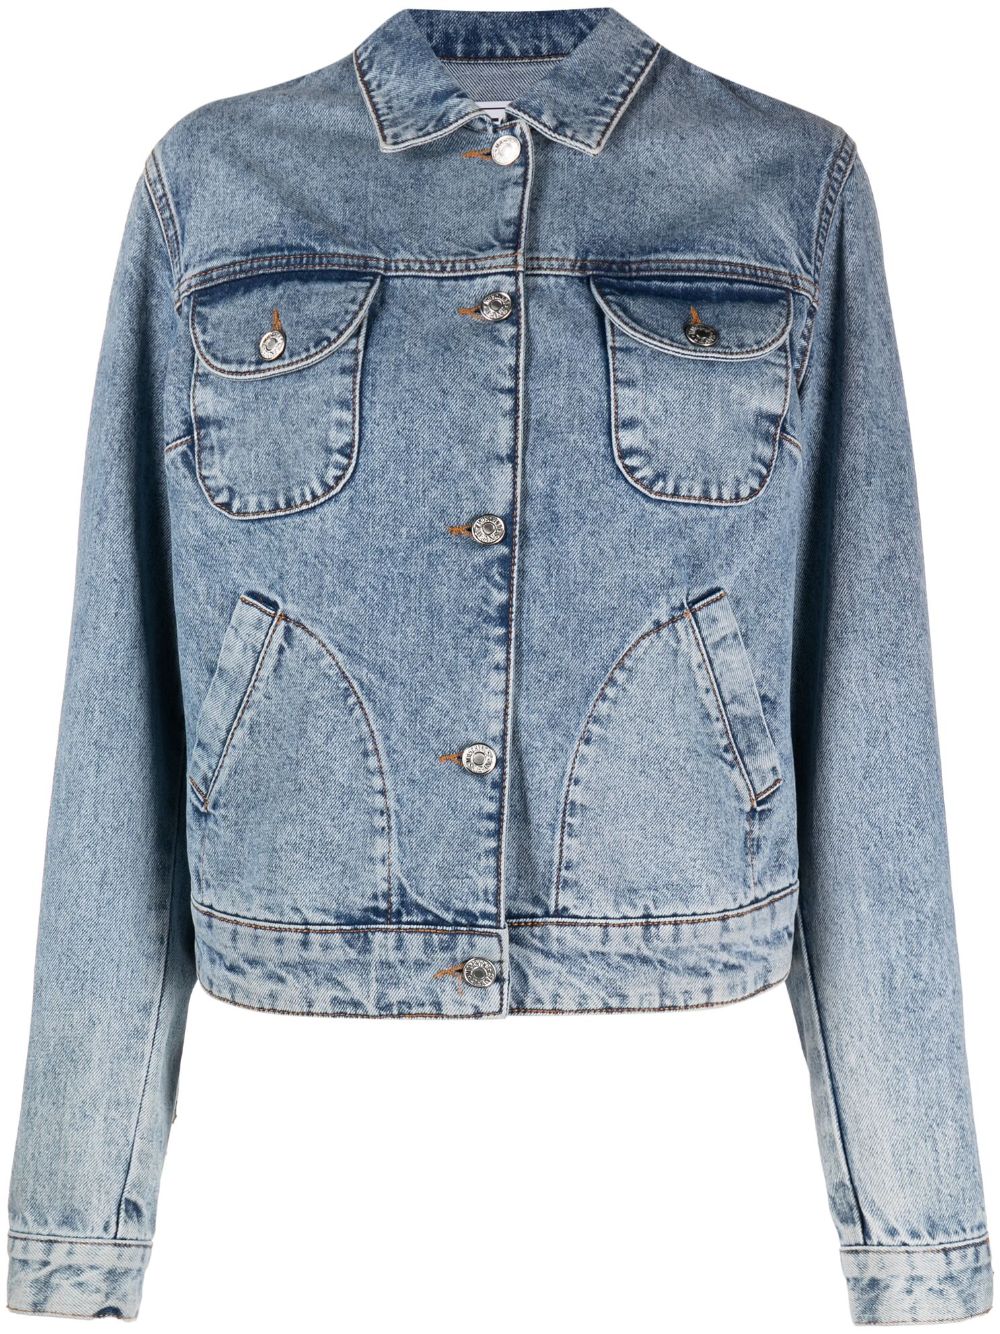 Moschino Jeans Fringed Denim Jacket In Blue